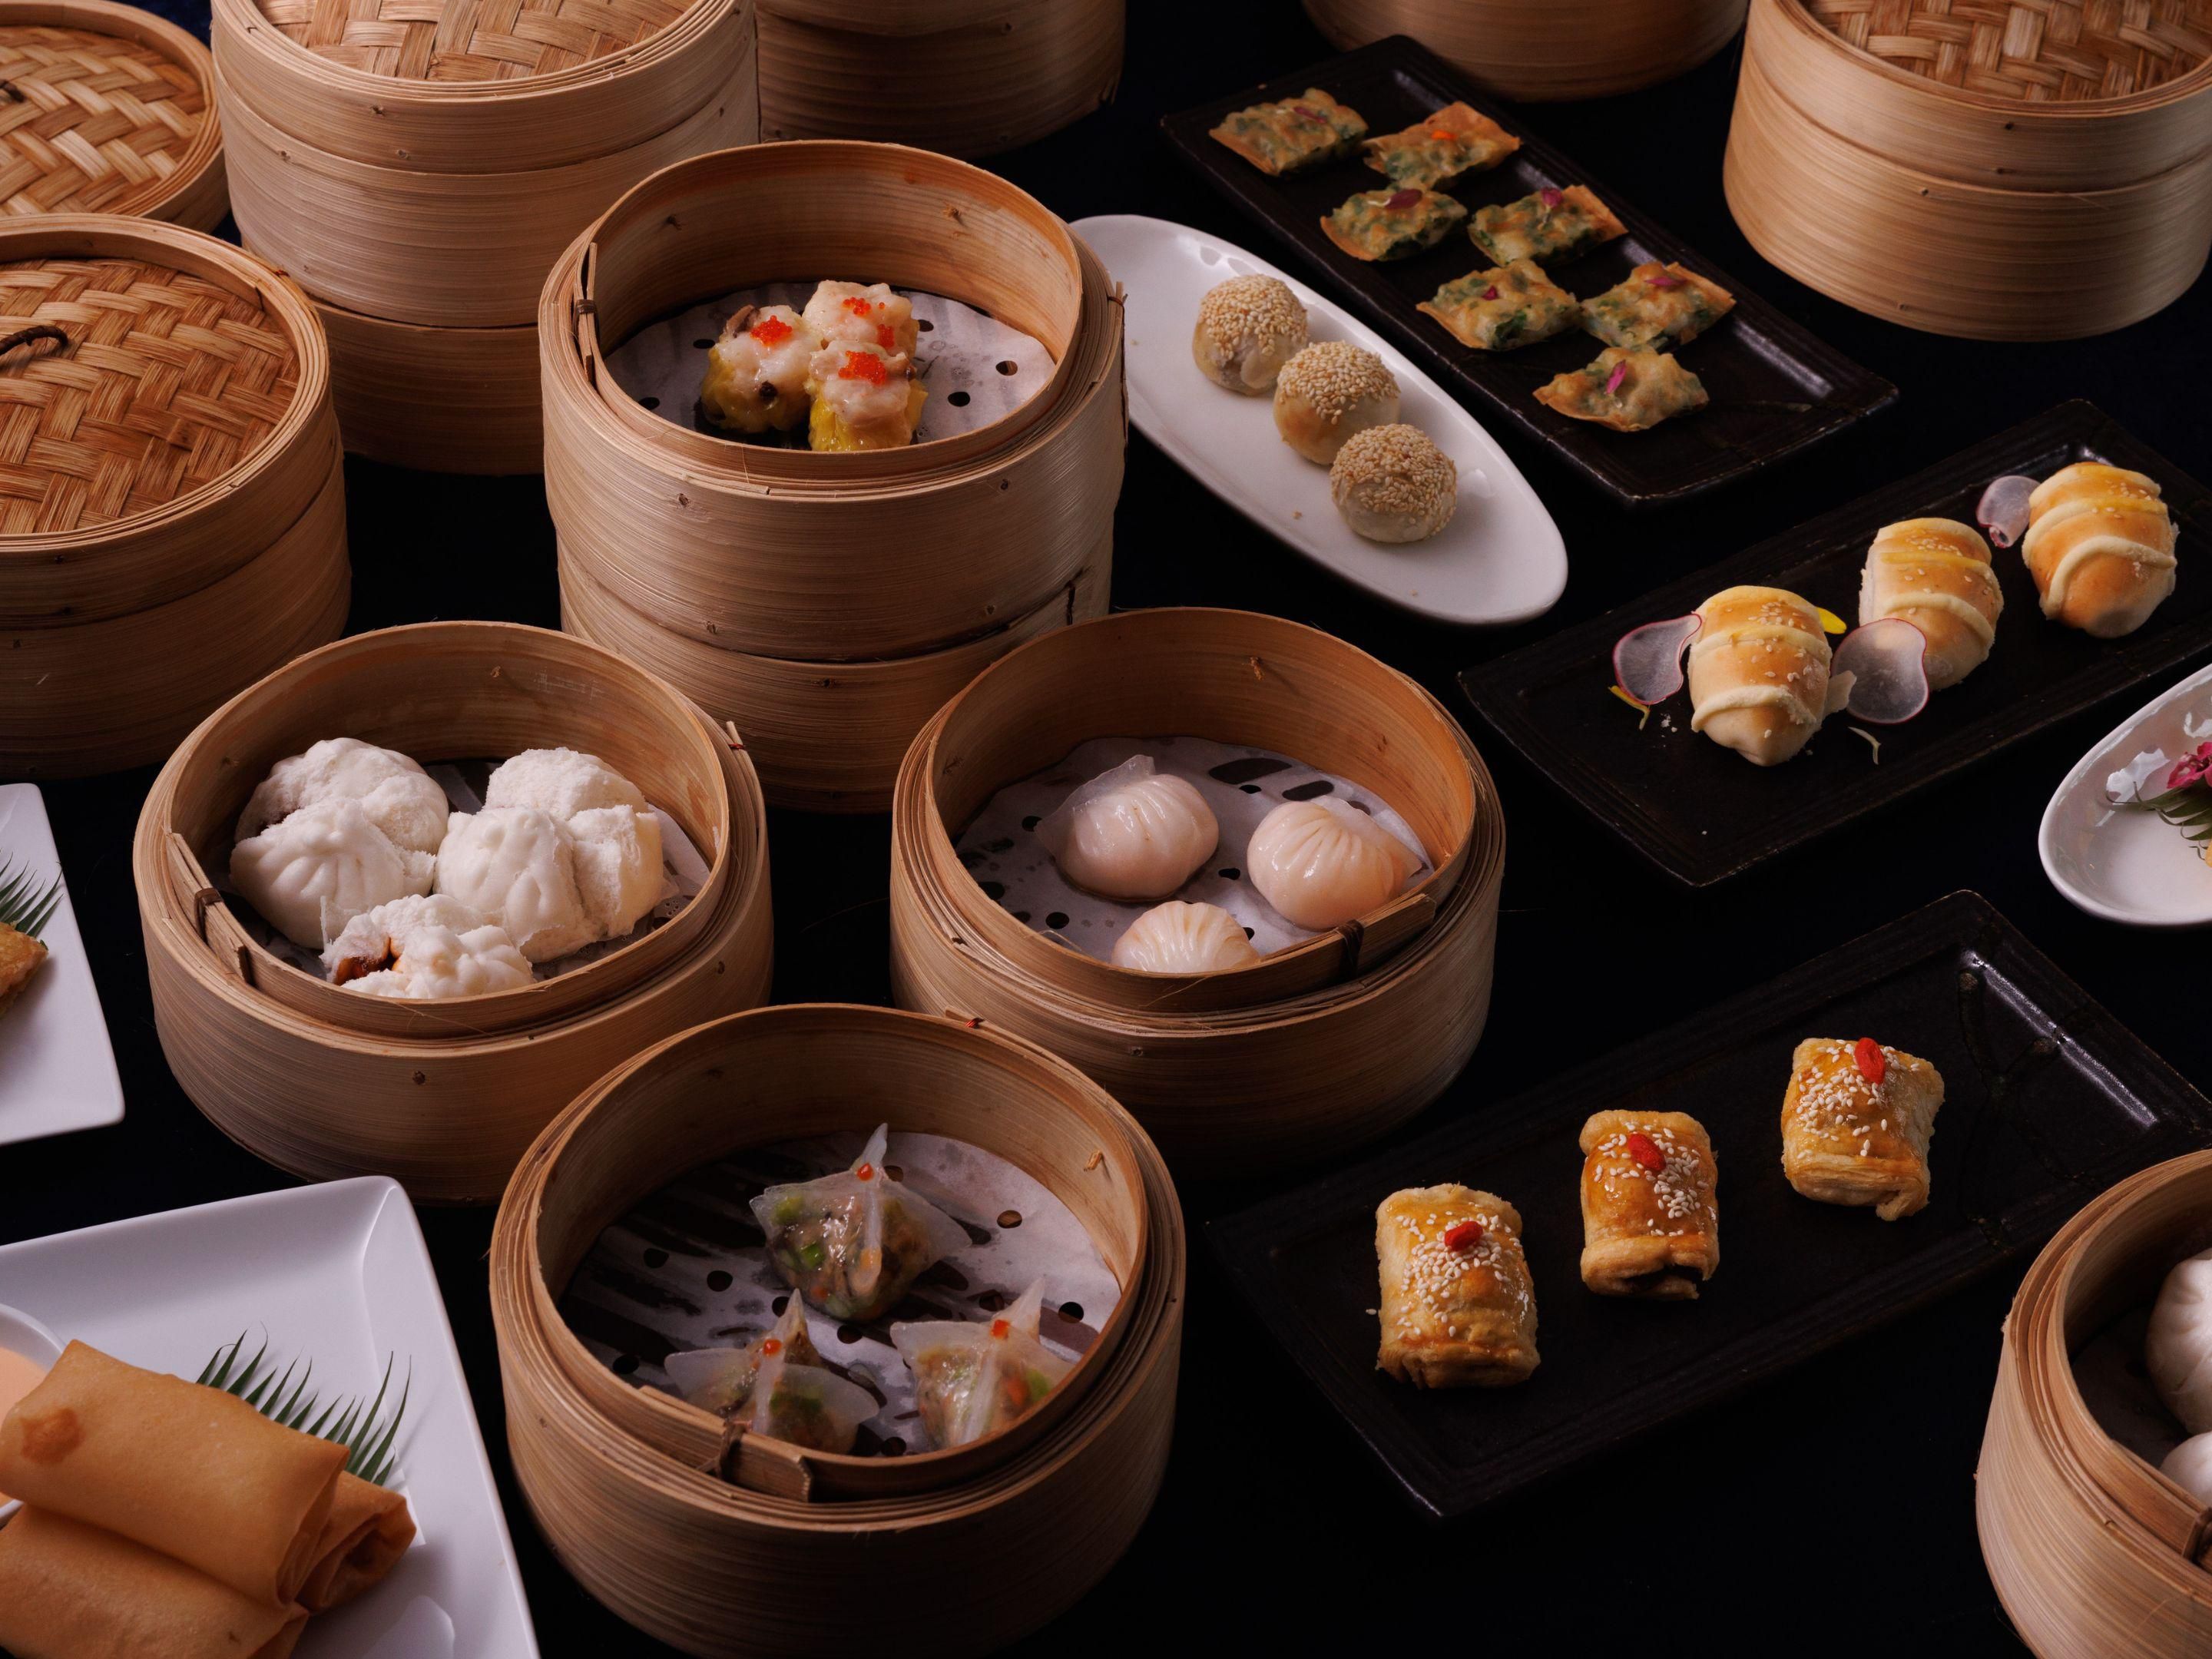 All-you-can-eat Dim Sum